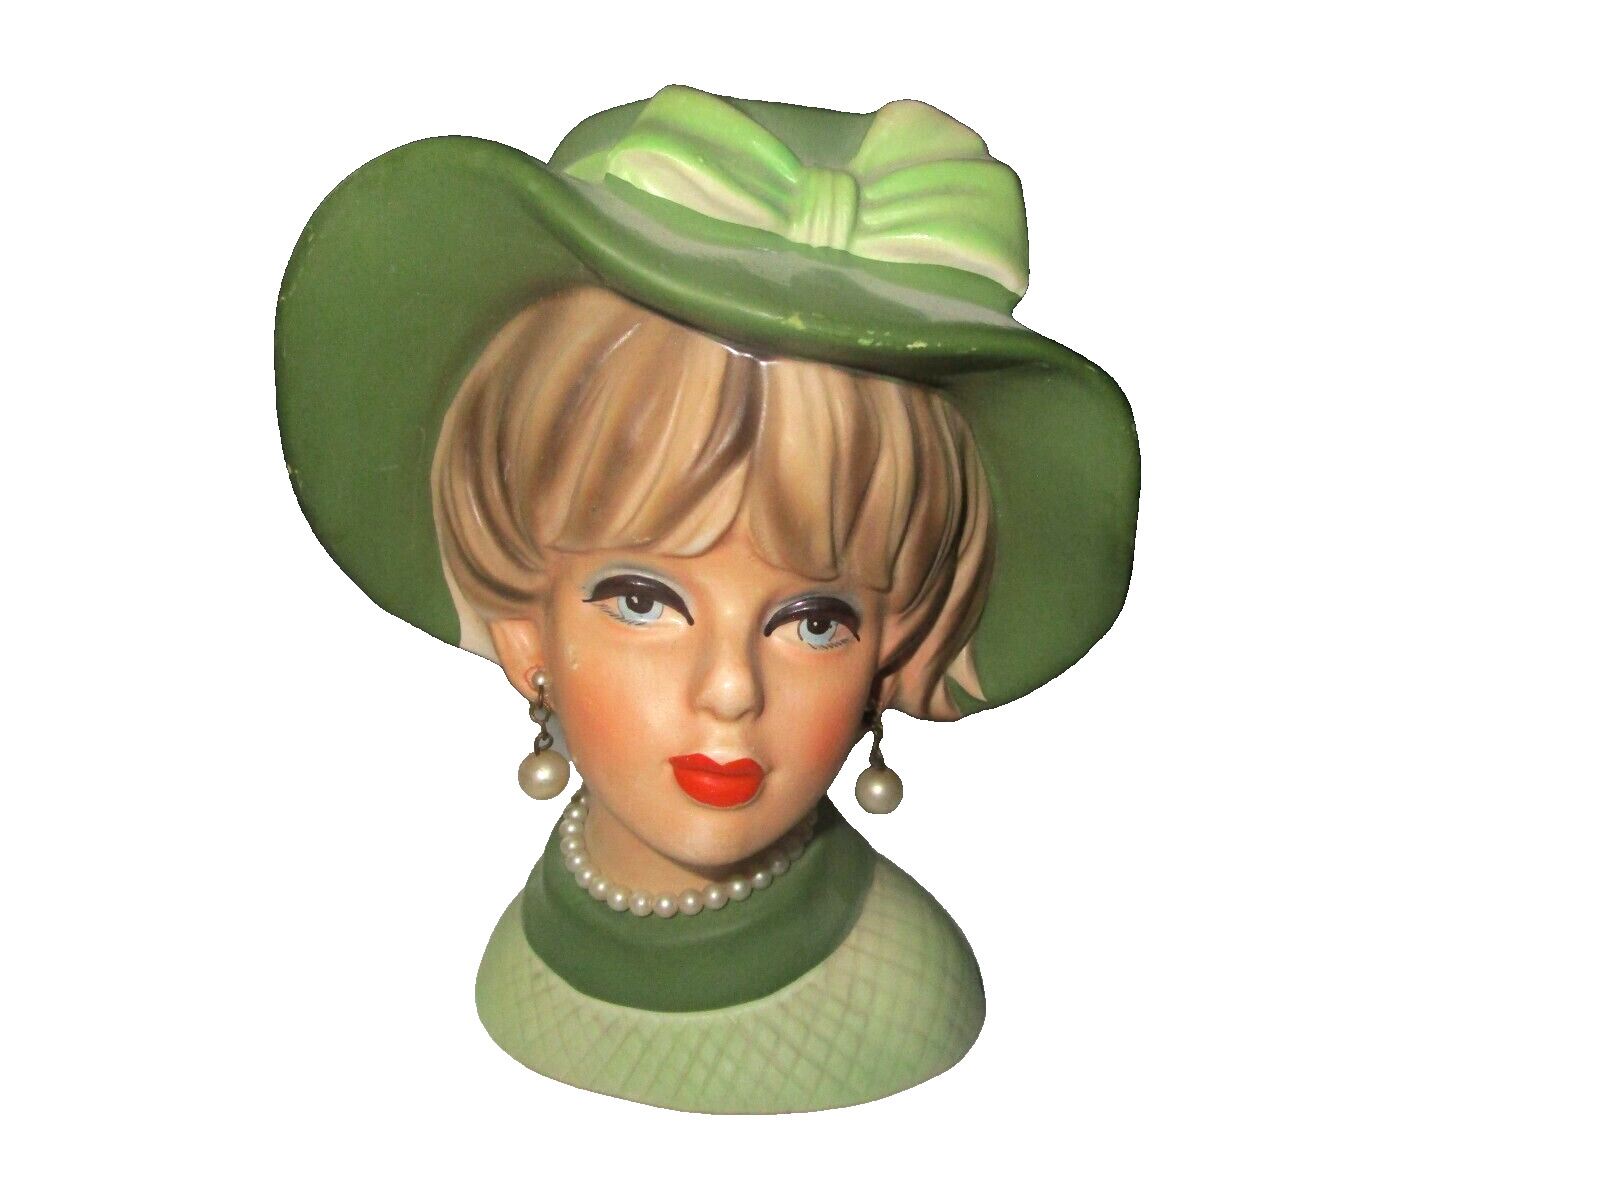 Vintage Napco Lady Head Vase C9474 Green Hat Earrings and Necklace